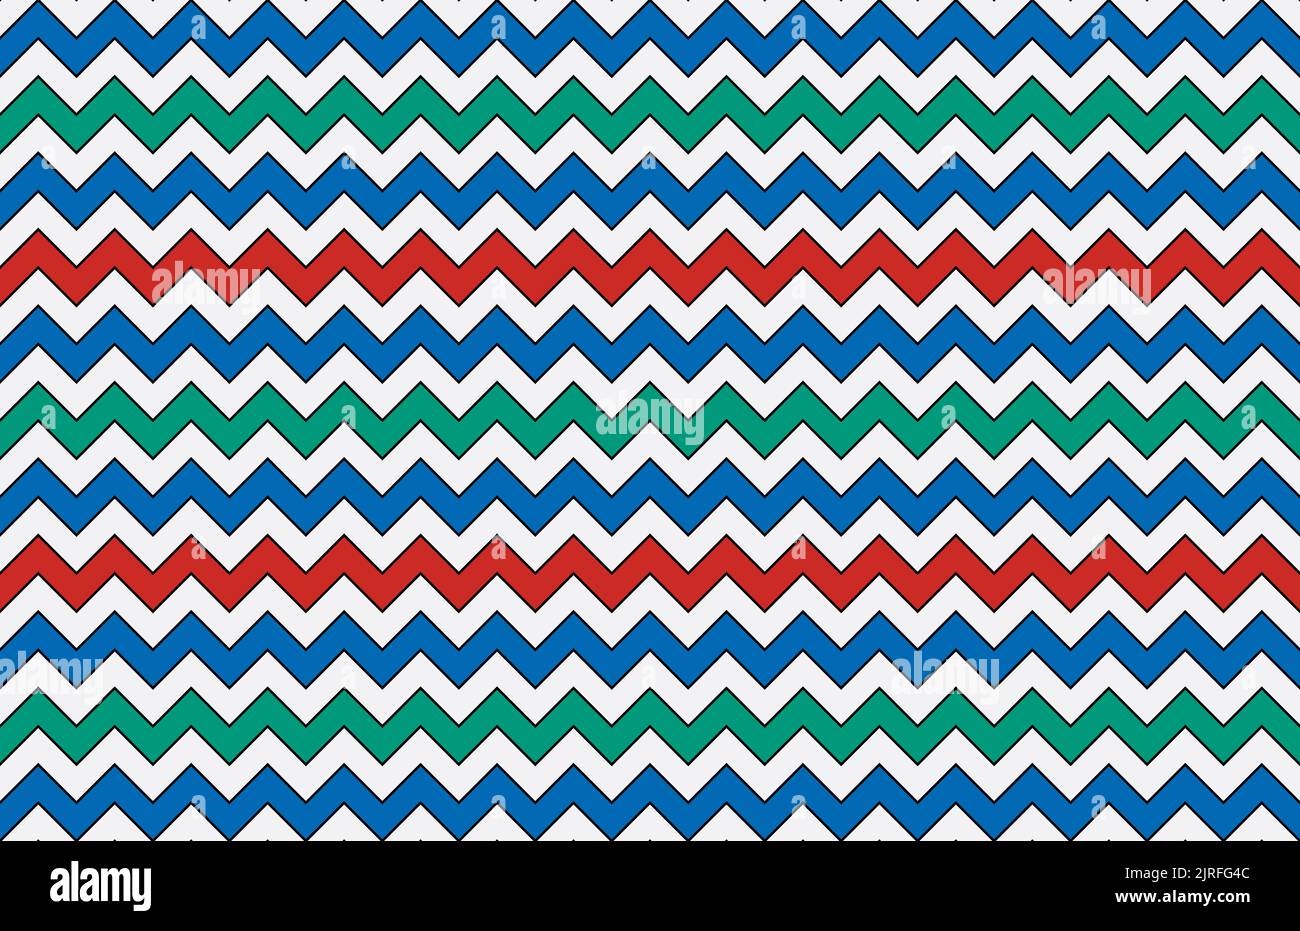 Wavy zigzag pattern in ancient Egypt color style. Seamless tile with a pattern, based on the ancient Egyptian colors red, turquoise, blue and white. Stock Photo